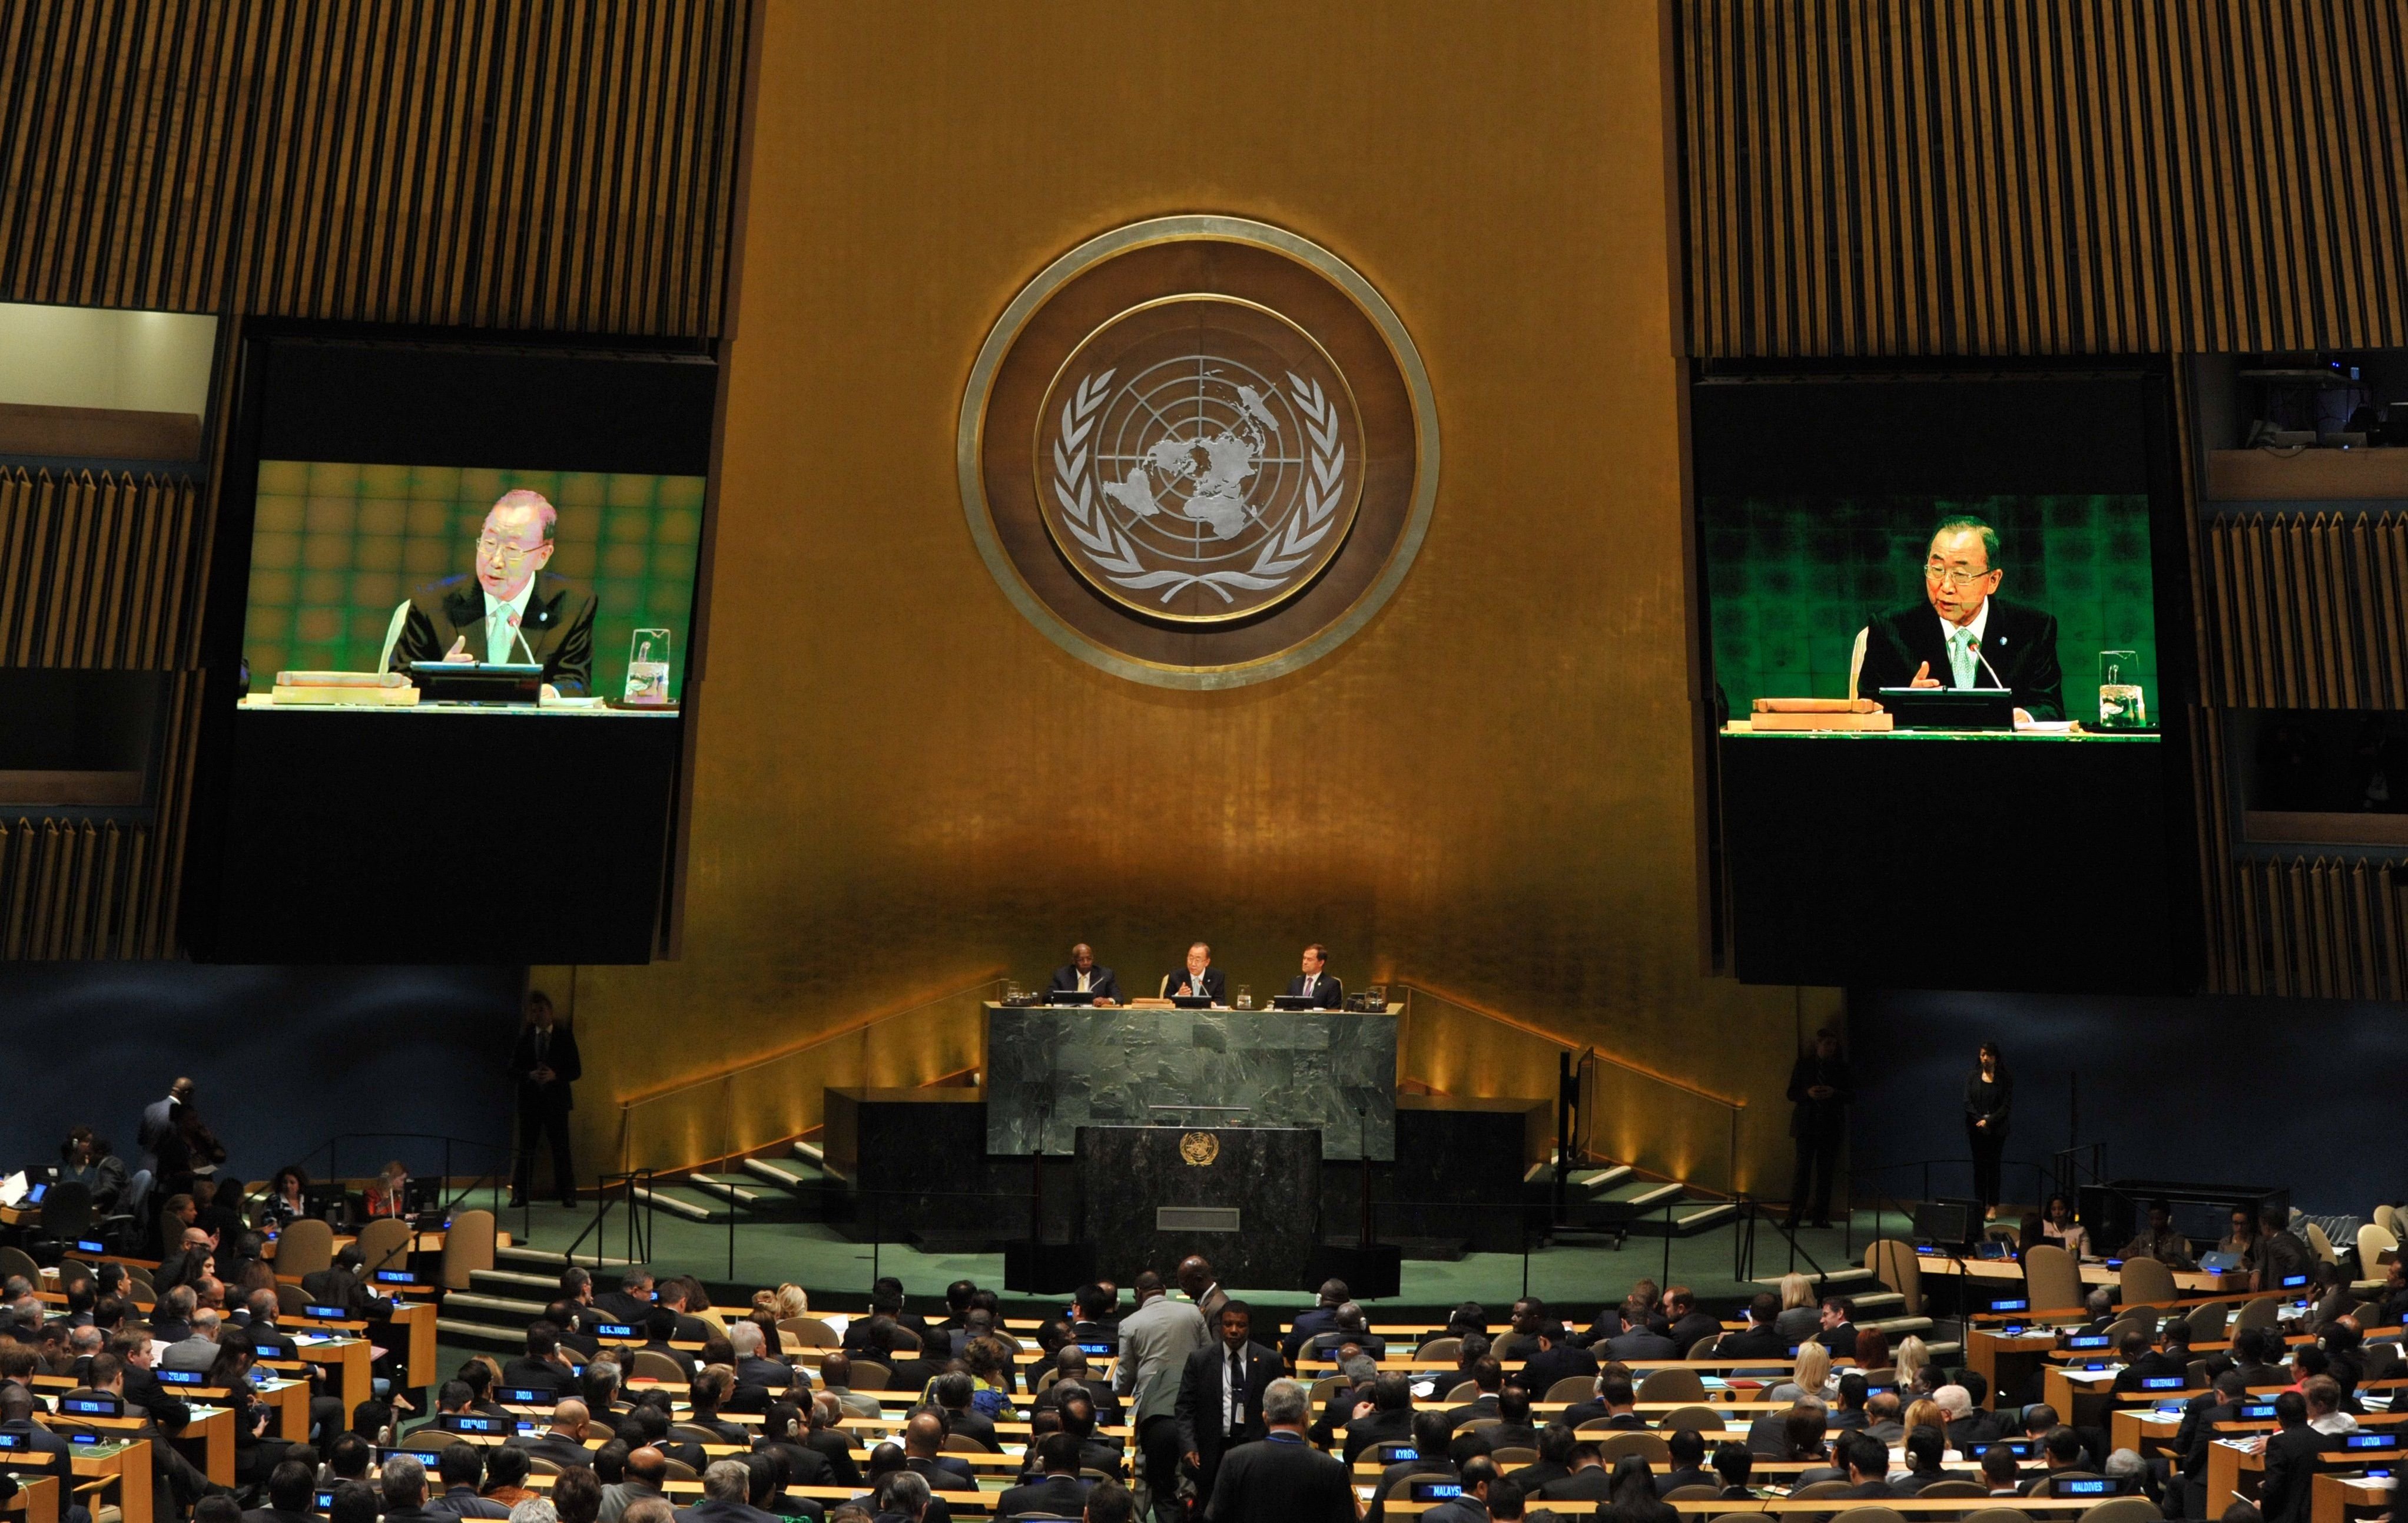 UN Secretary-General Ban Ki-moon speaks during the Opening Session of the Climate Change Summit at the United Nations in New York City on Sept. 23, 2014. (Timothy A. Clary—AFP/Getty Images)